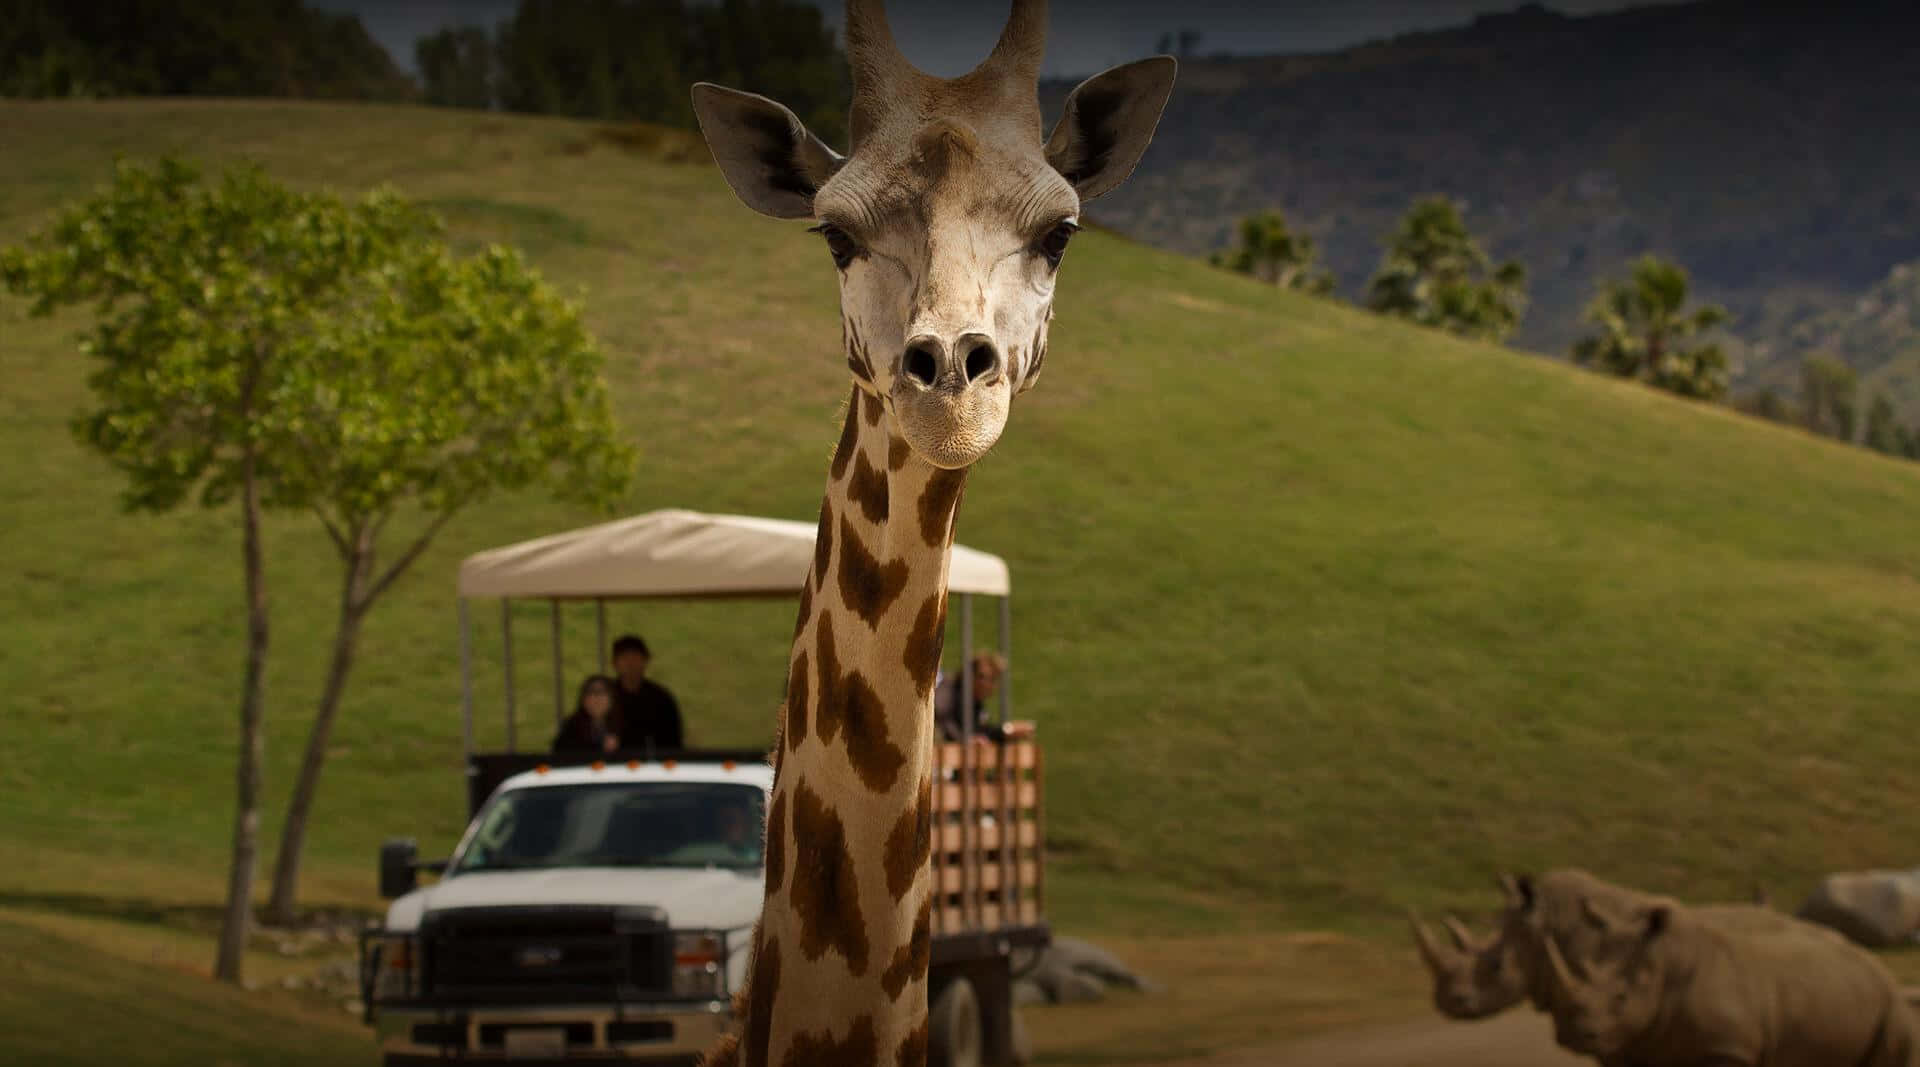 "Take in the serene beauty of an African savannah landscape, featuring the majestic animal of the wild: The Giraffe."